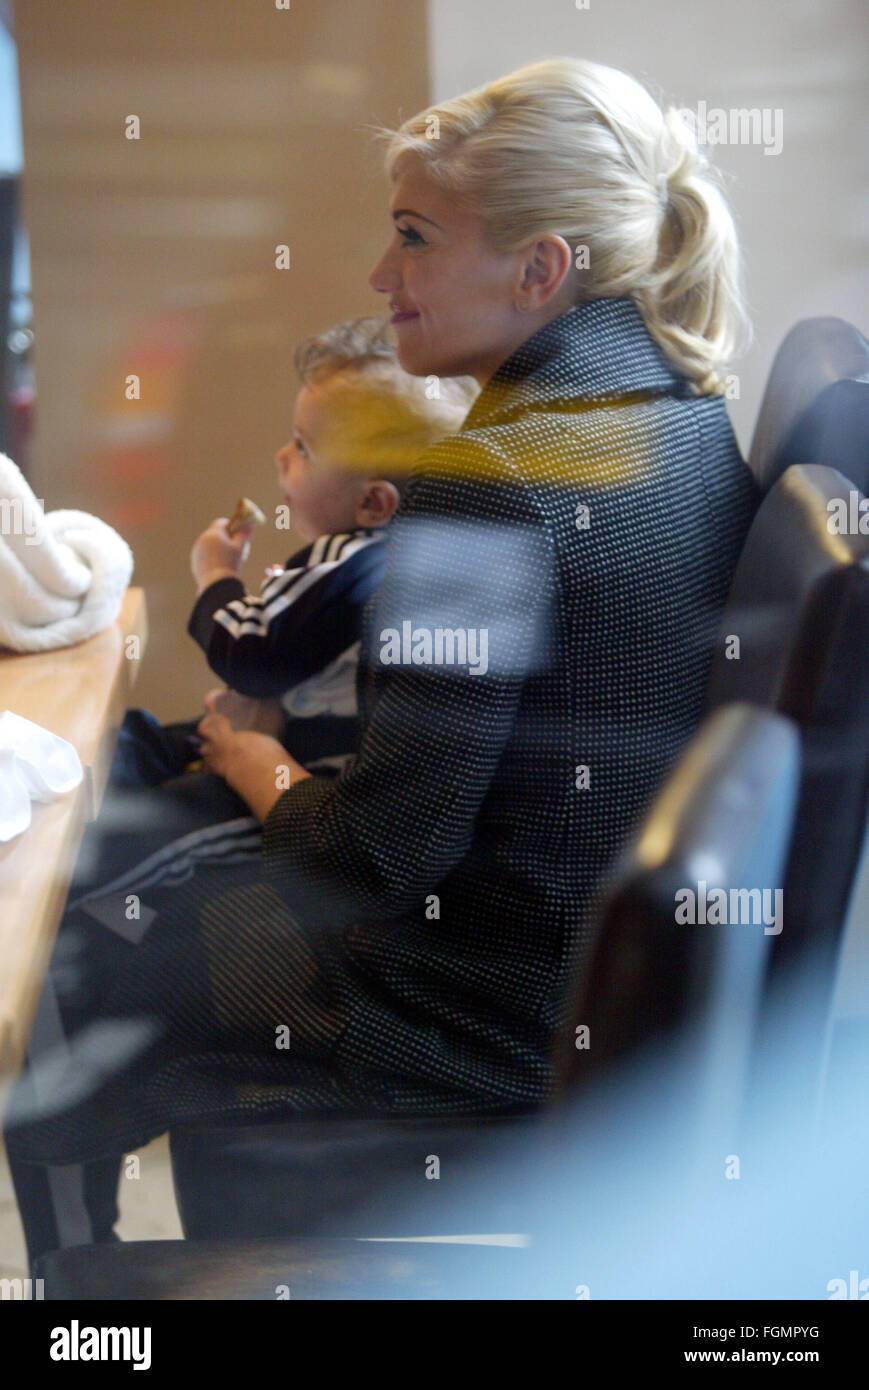 Gwen Stefani and Baby Kingston have Lunch  (credit image © Jack Ludlam) Stock Photo